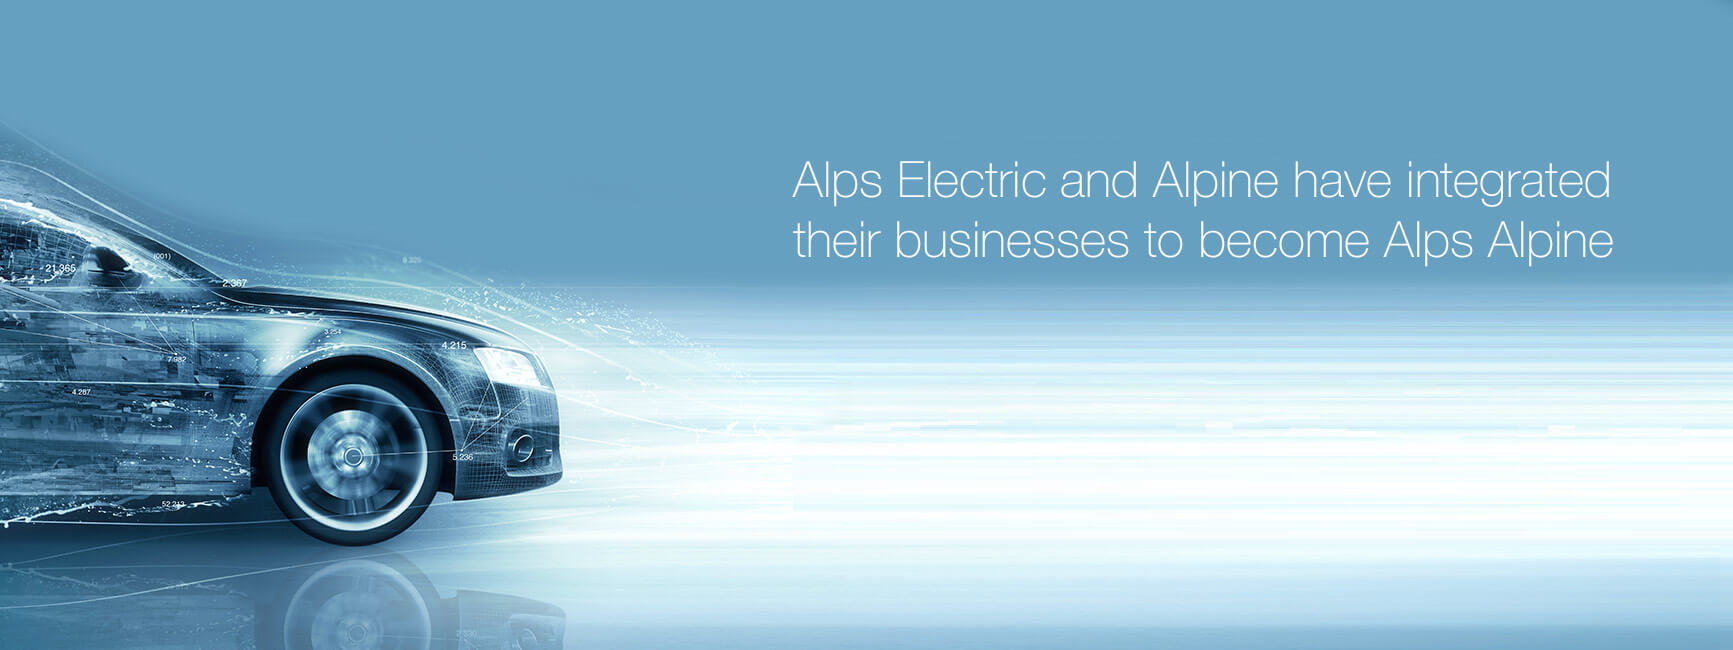 Alps Electric and Alpine have integrated their businesses to become Alps Alpine